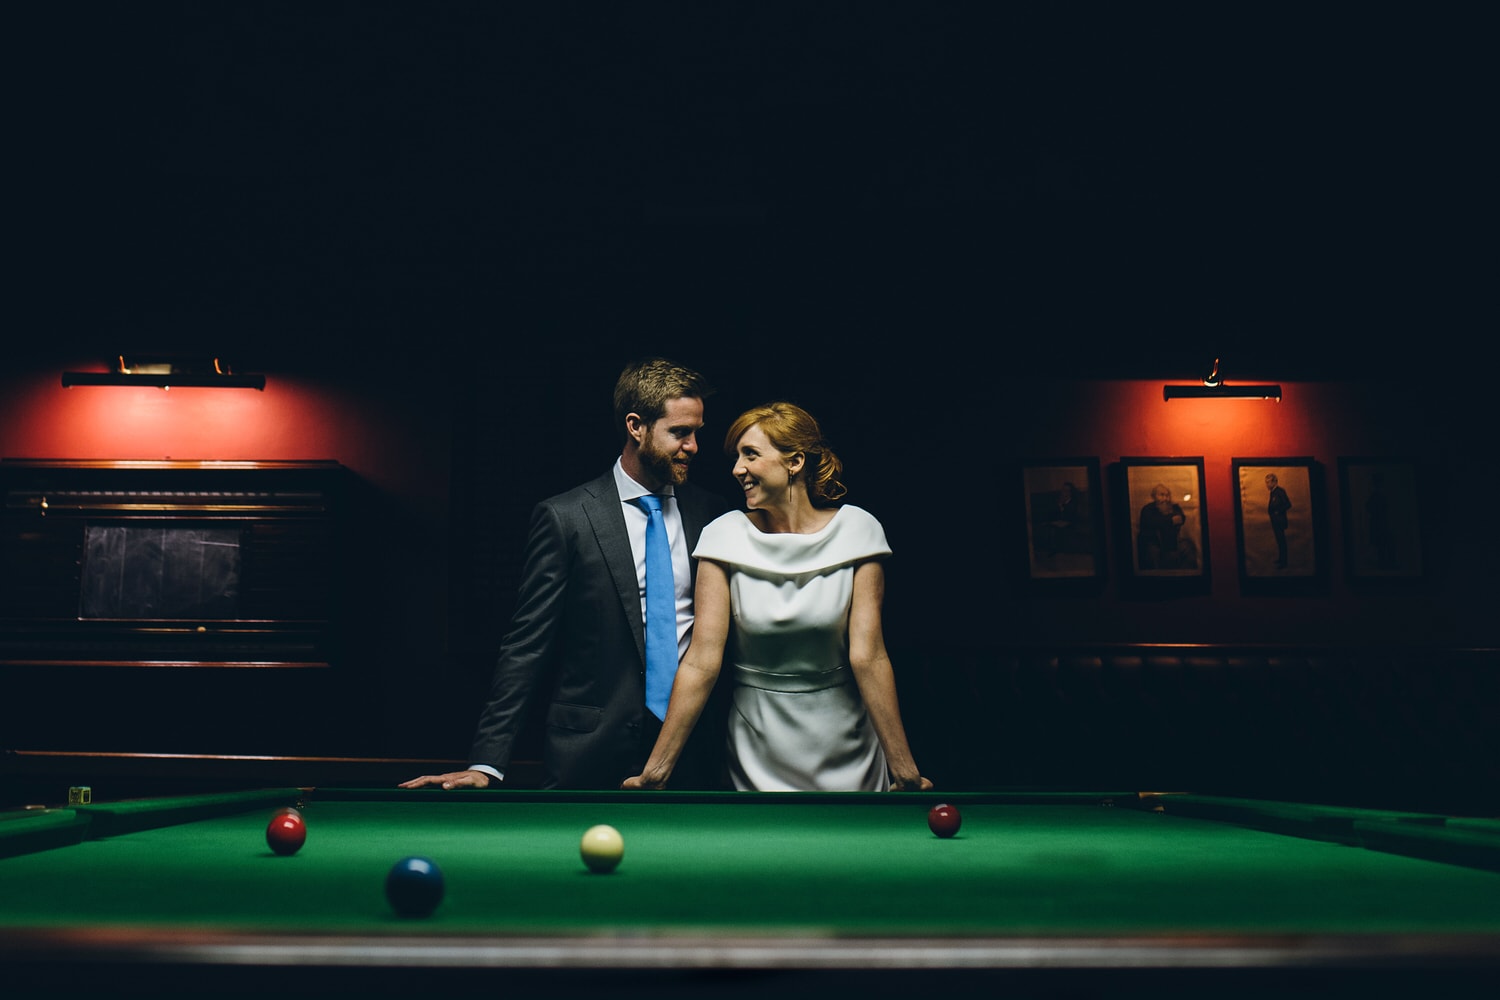 Couple in front of Snooker Table  at Stephen's Green Club in Dublin